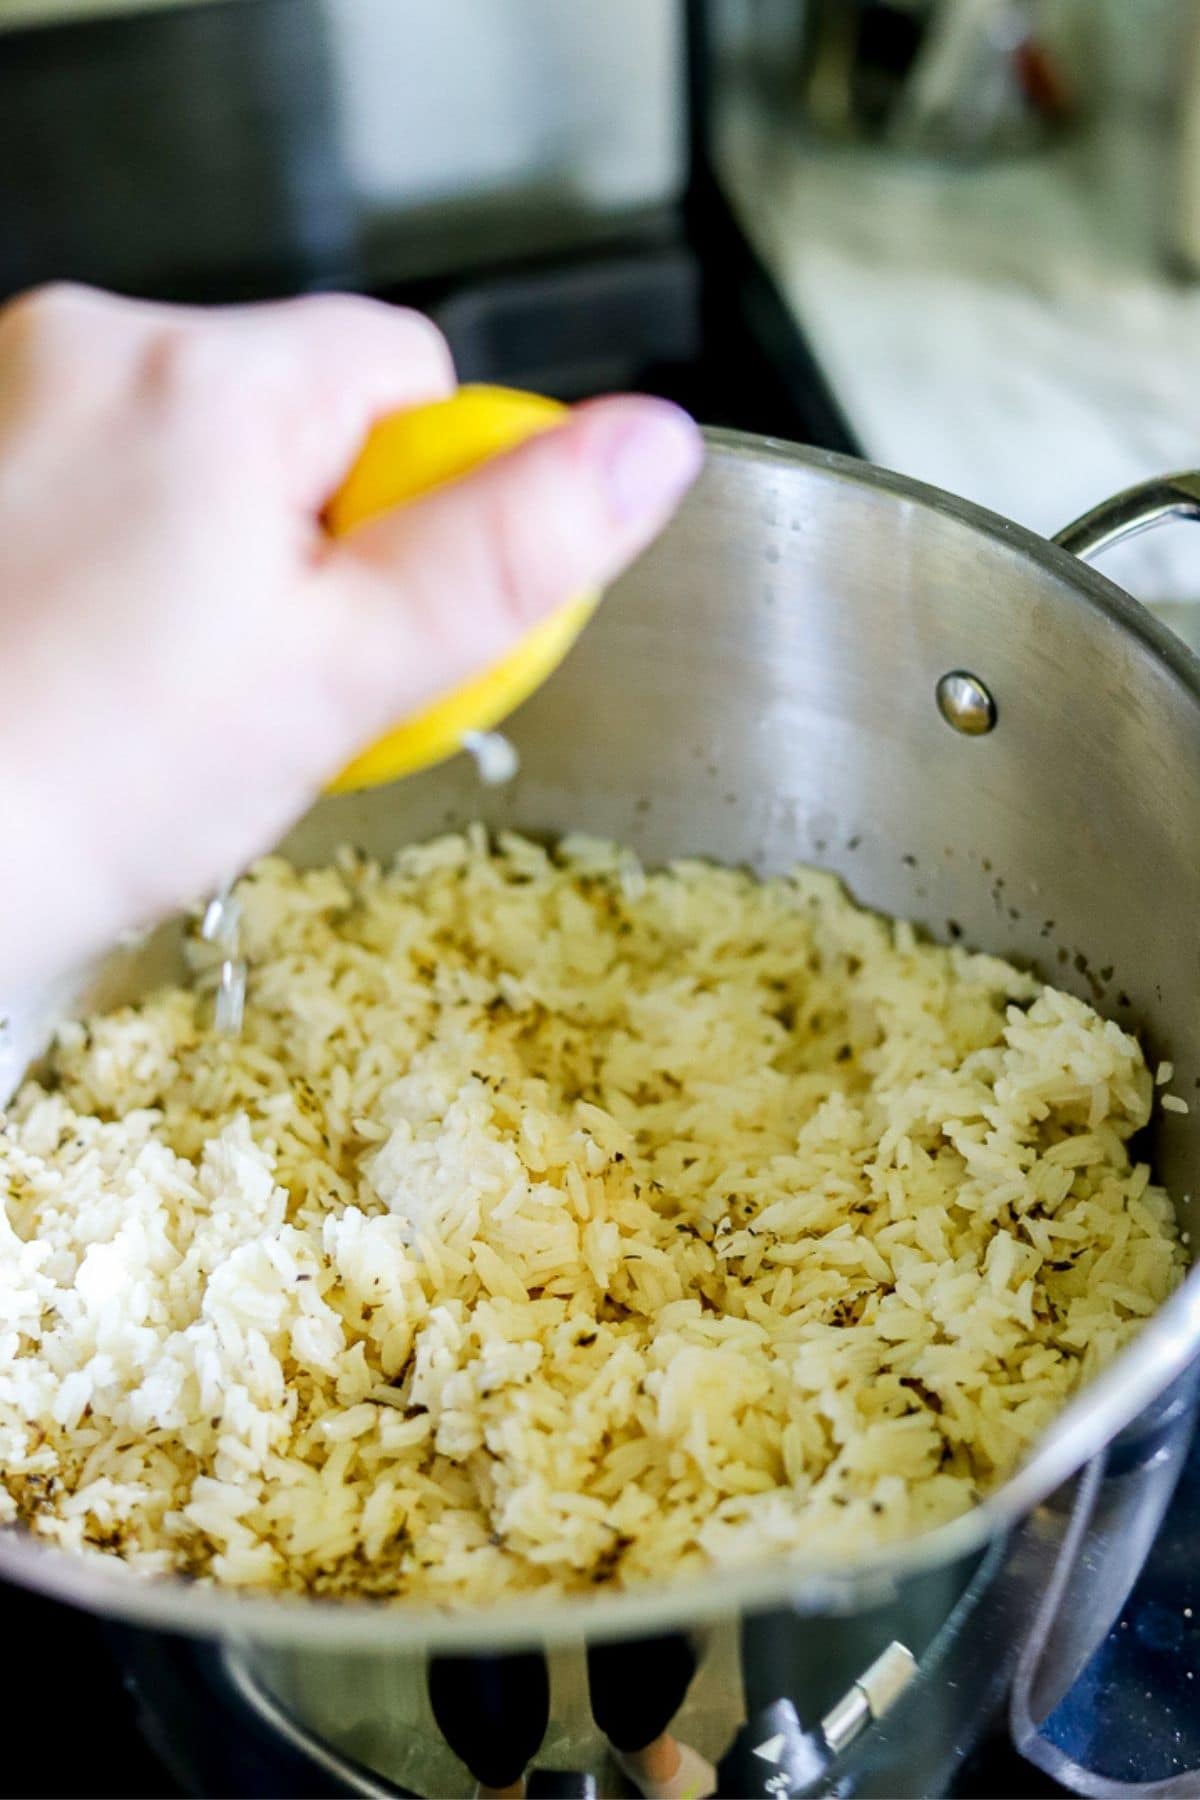 fresh lemon juice being squeezed into a pot of fresh rice.